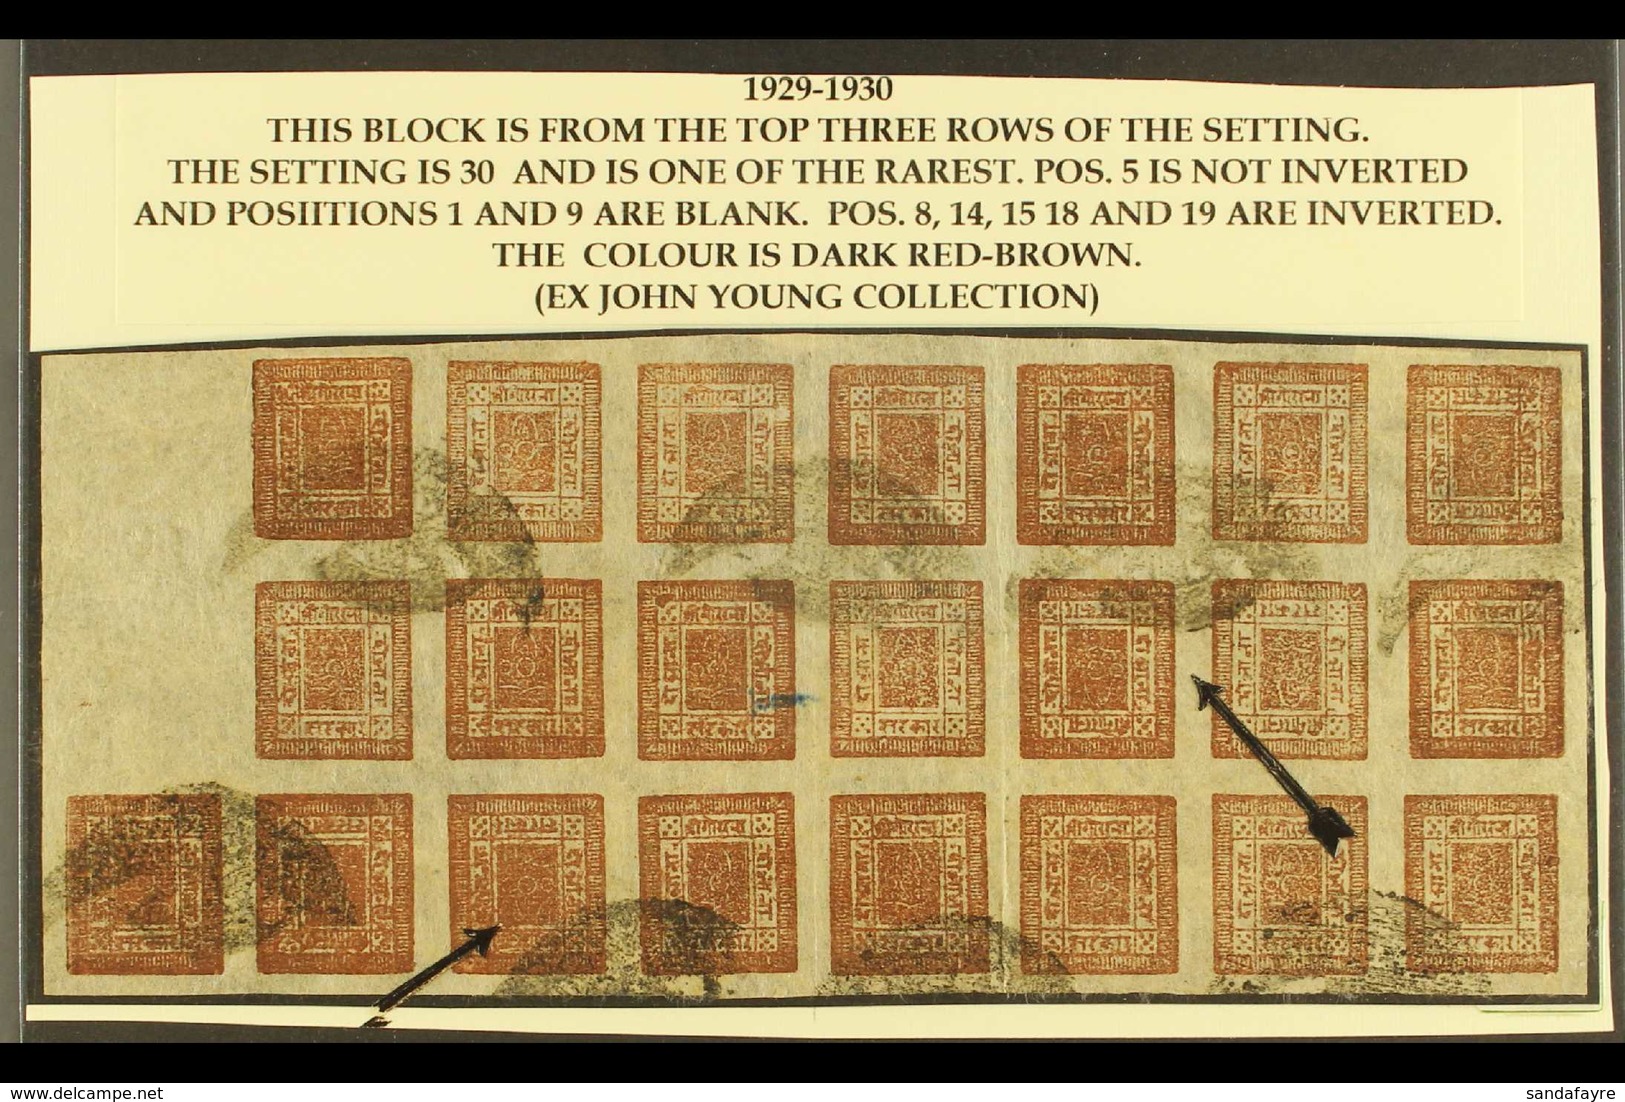 1917-30 2a Brown (SG 40, Scott 16, Hellrigl 41/42), telegraphically Used Block Comprising The Top Three Rows Of The RARE - Nepal